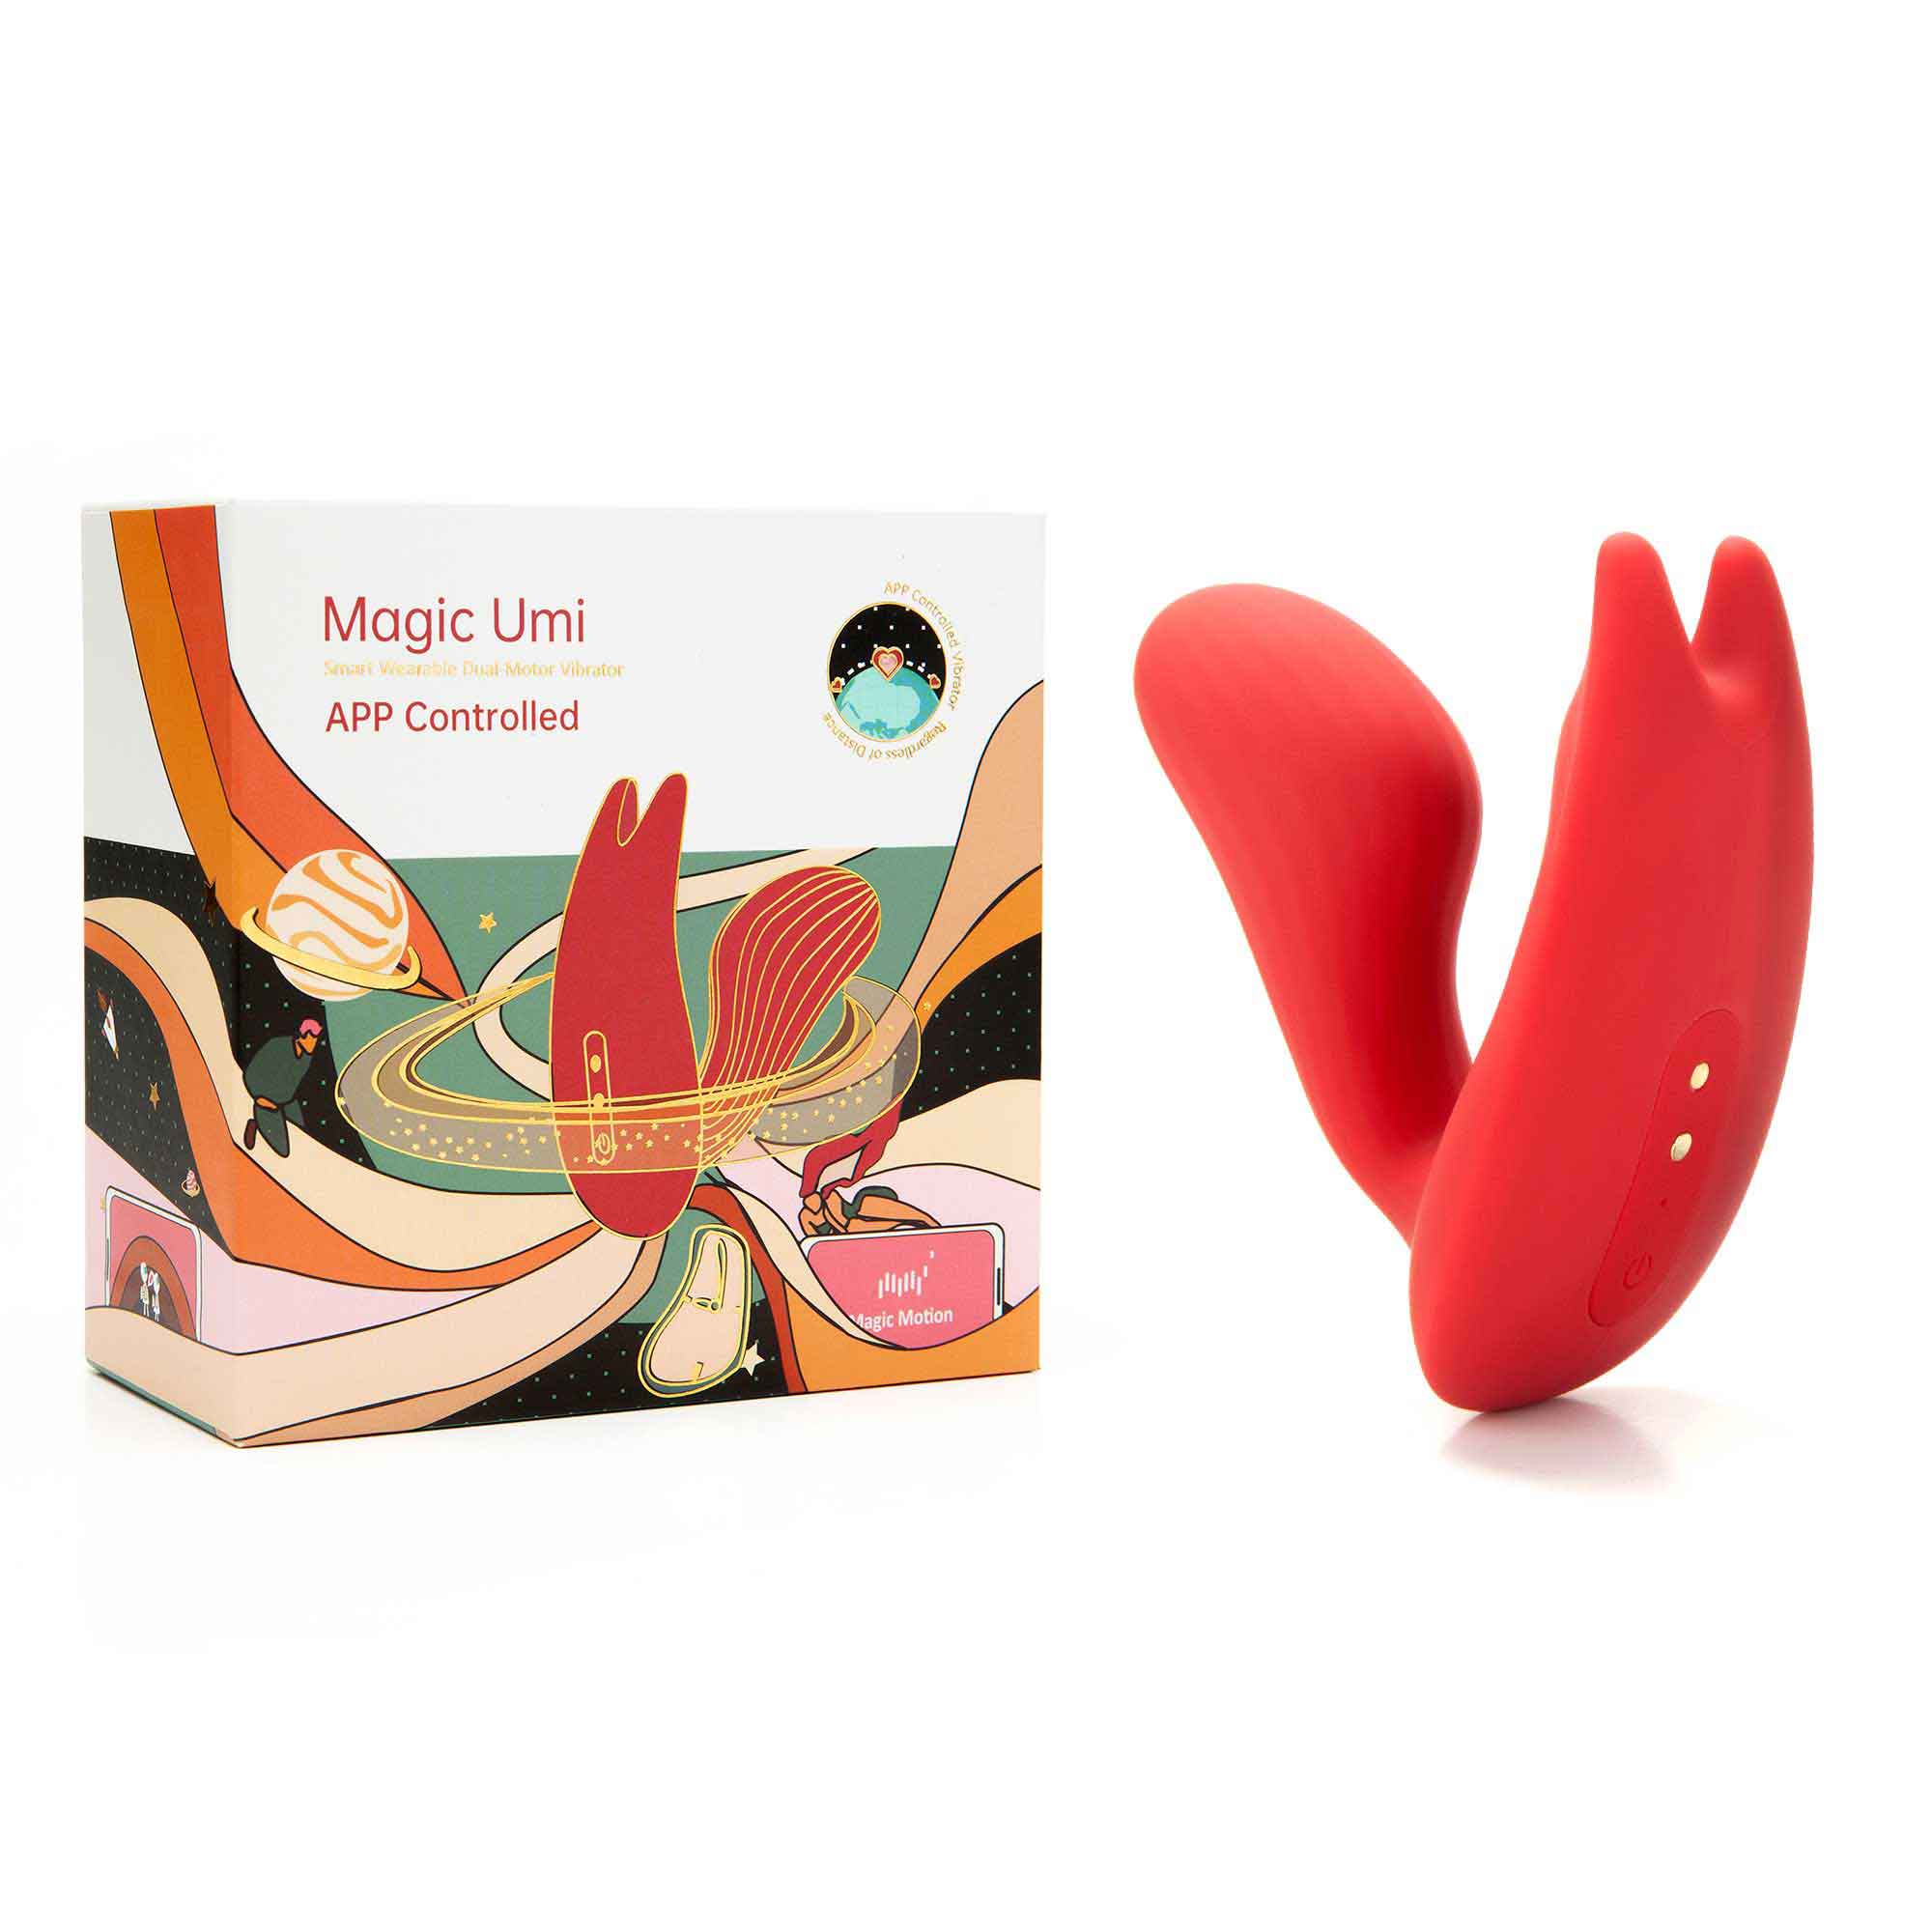 Magic Motion Umi RED APP Controlled Smari Wearable Dual-Motor Vibrator - MM-UMI RED